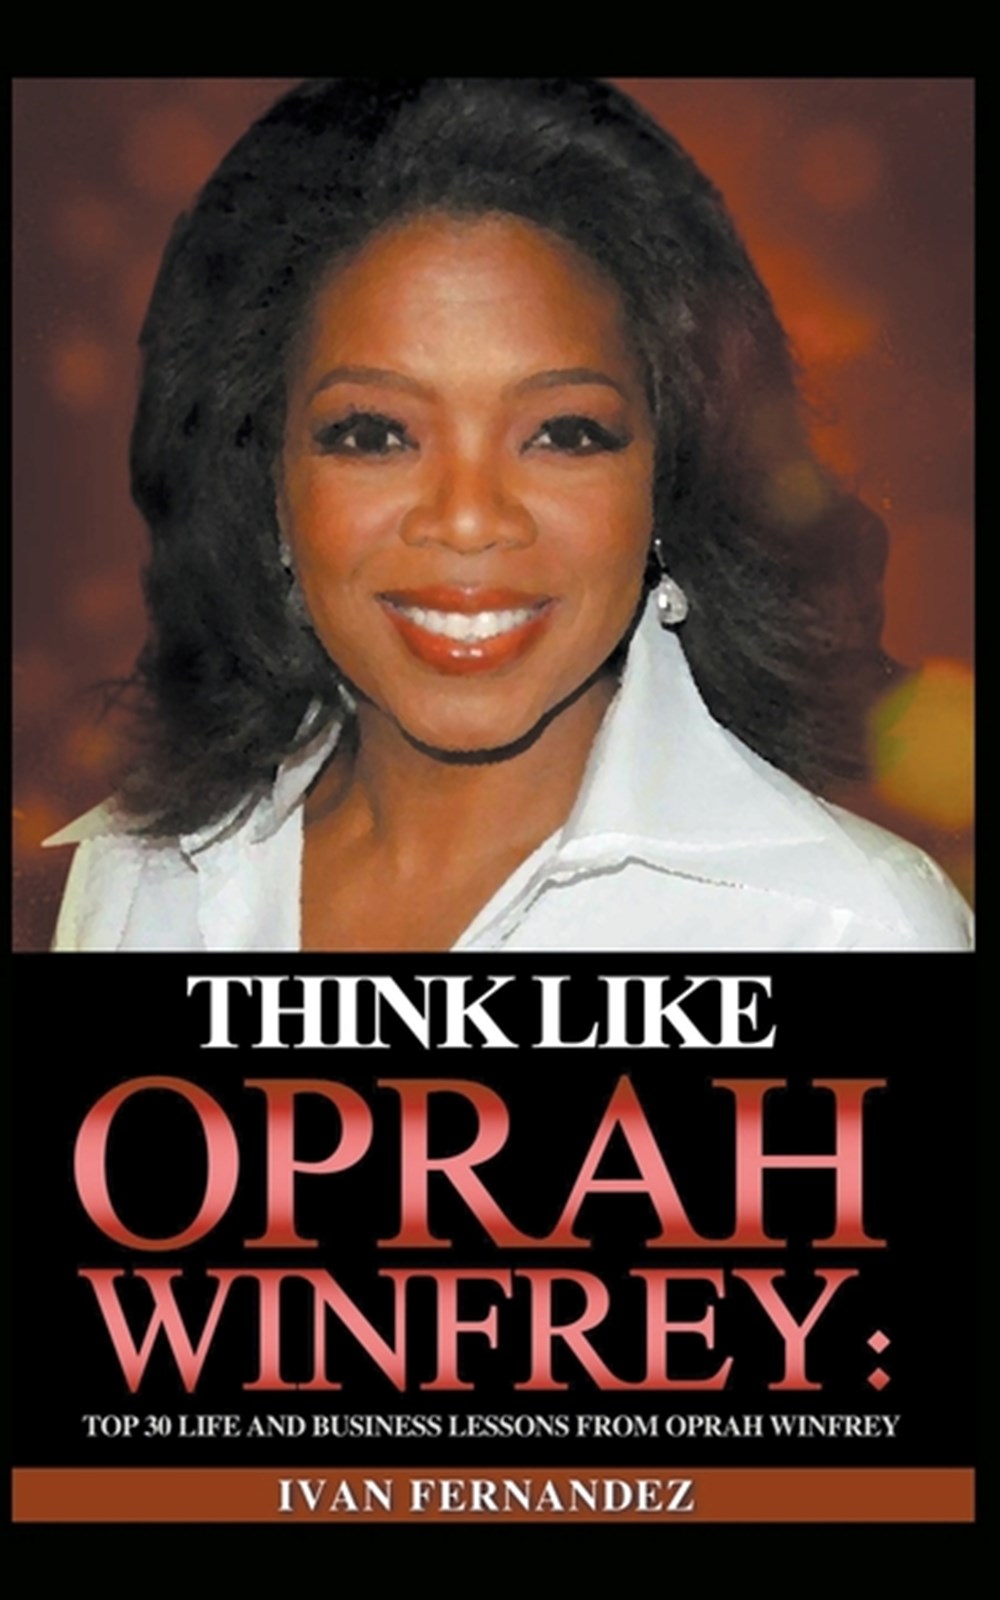 Think Like Oprah Winfrey Top 30 Life and Business Lessons from Oprah Winfrey